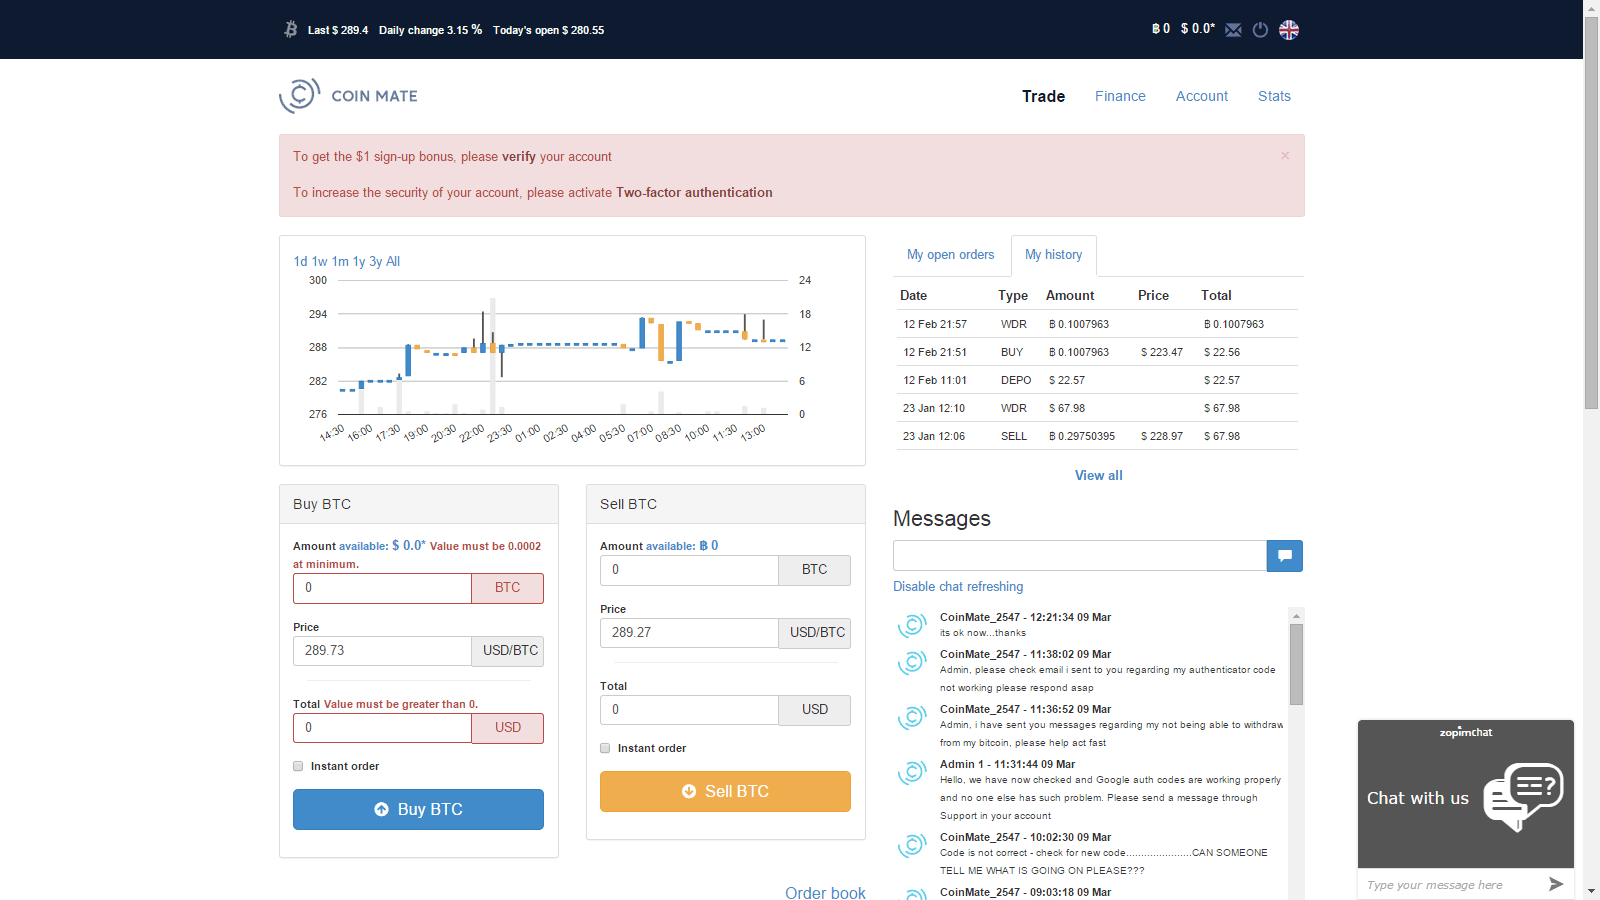 Buy and sell bitcoin quickly on one screen